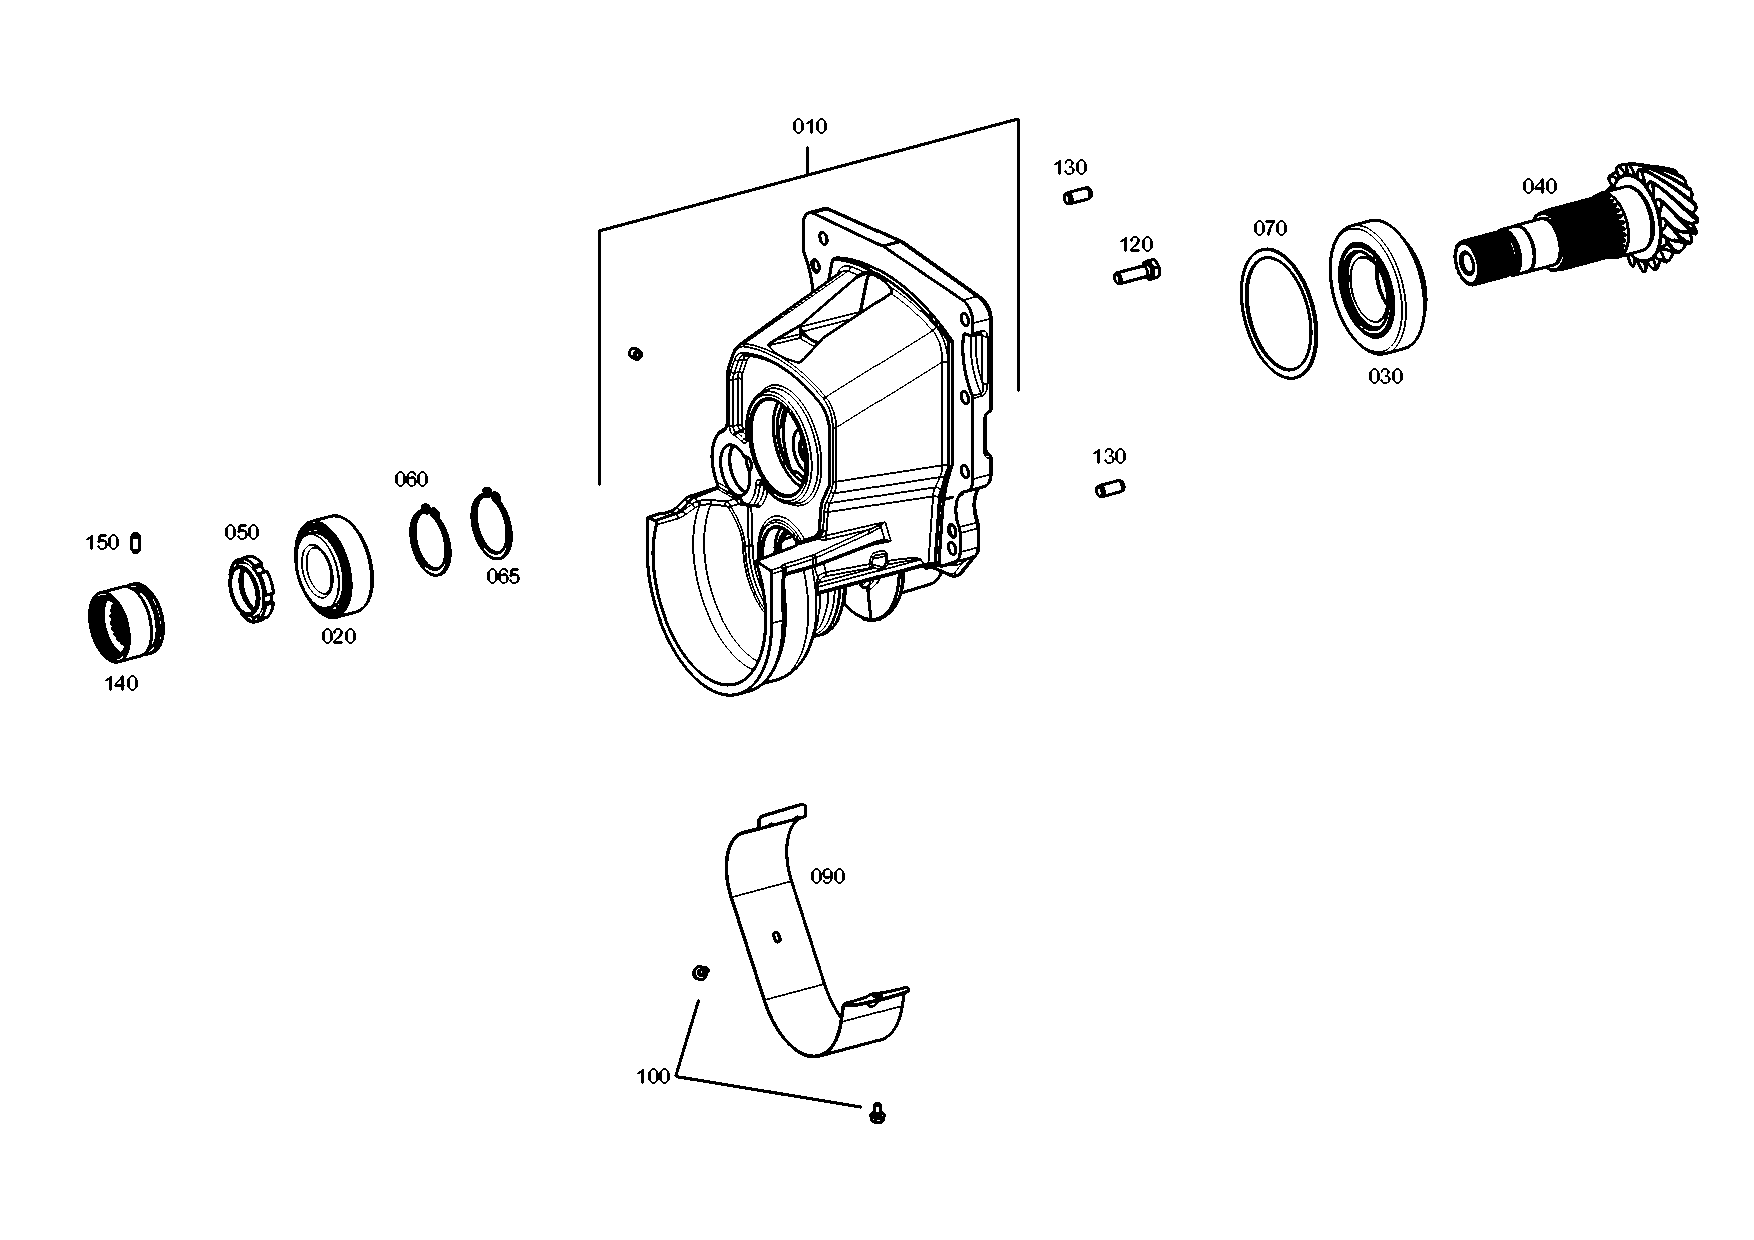 drawing for LUNA EQUIPOS INDUSTRIEALES, S.A. 199118250361 - ADJUSTMENT PLATE (figure 3)